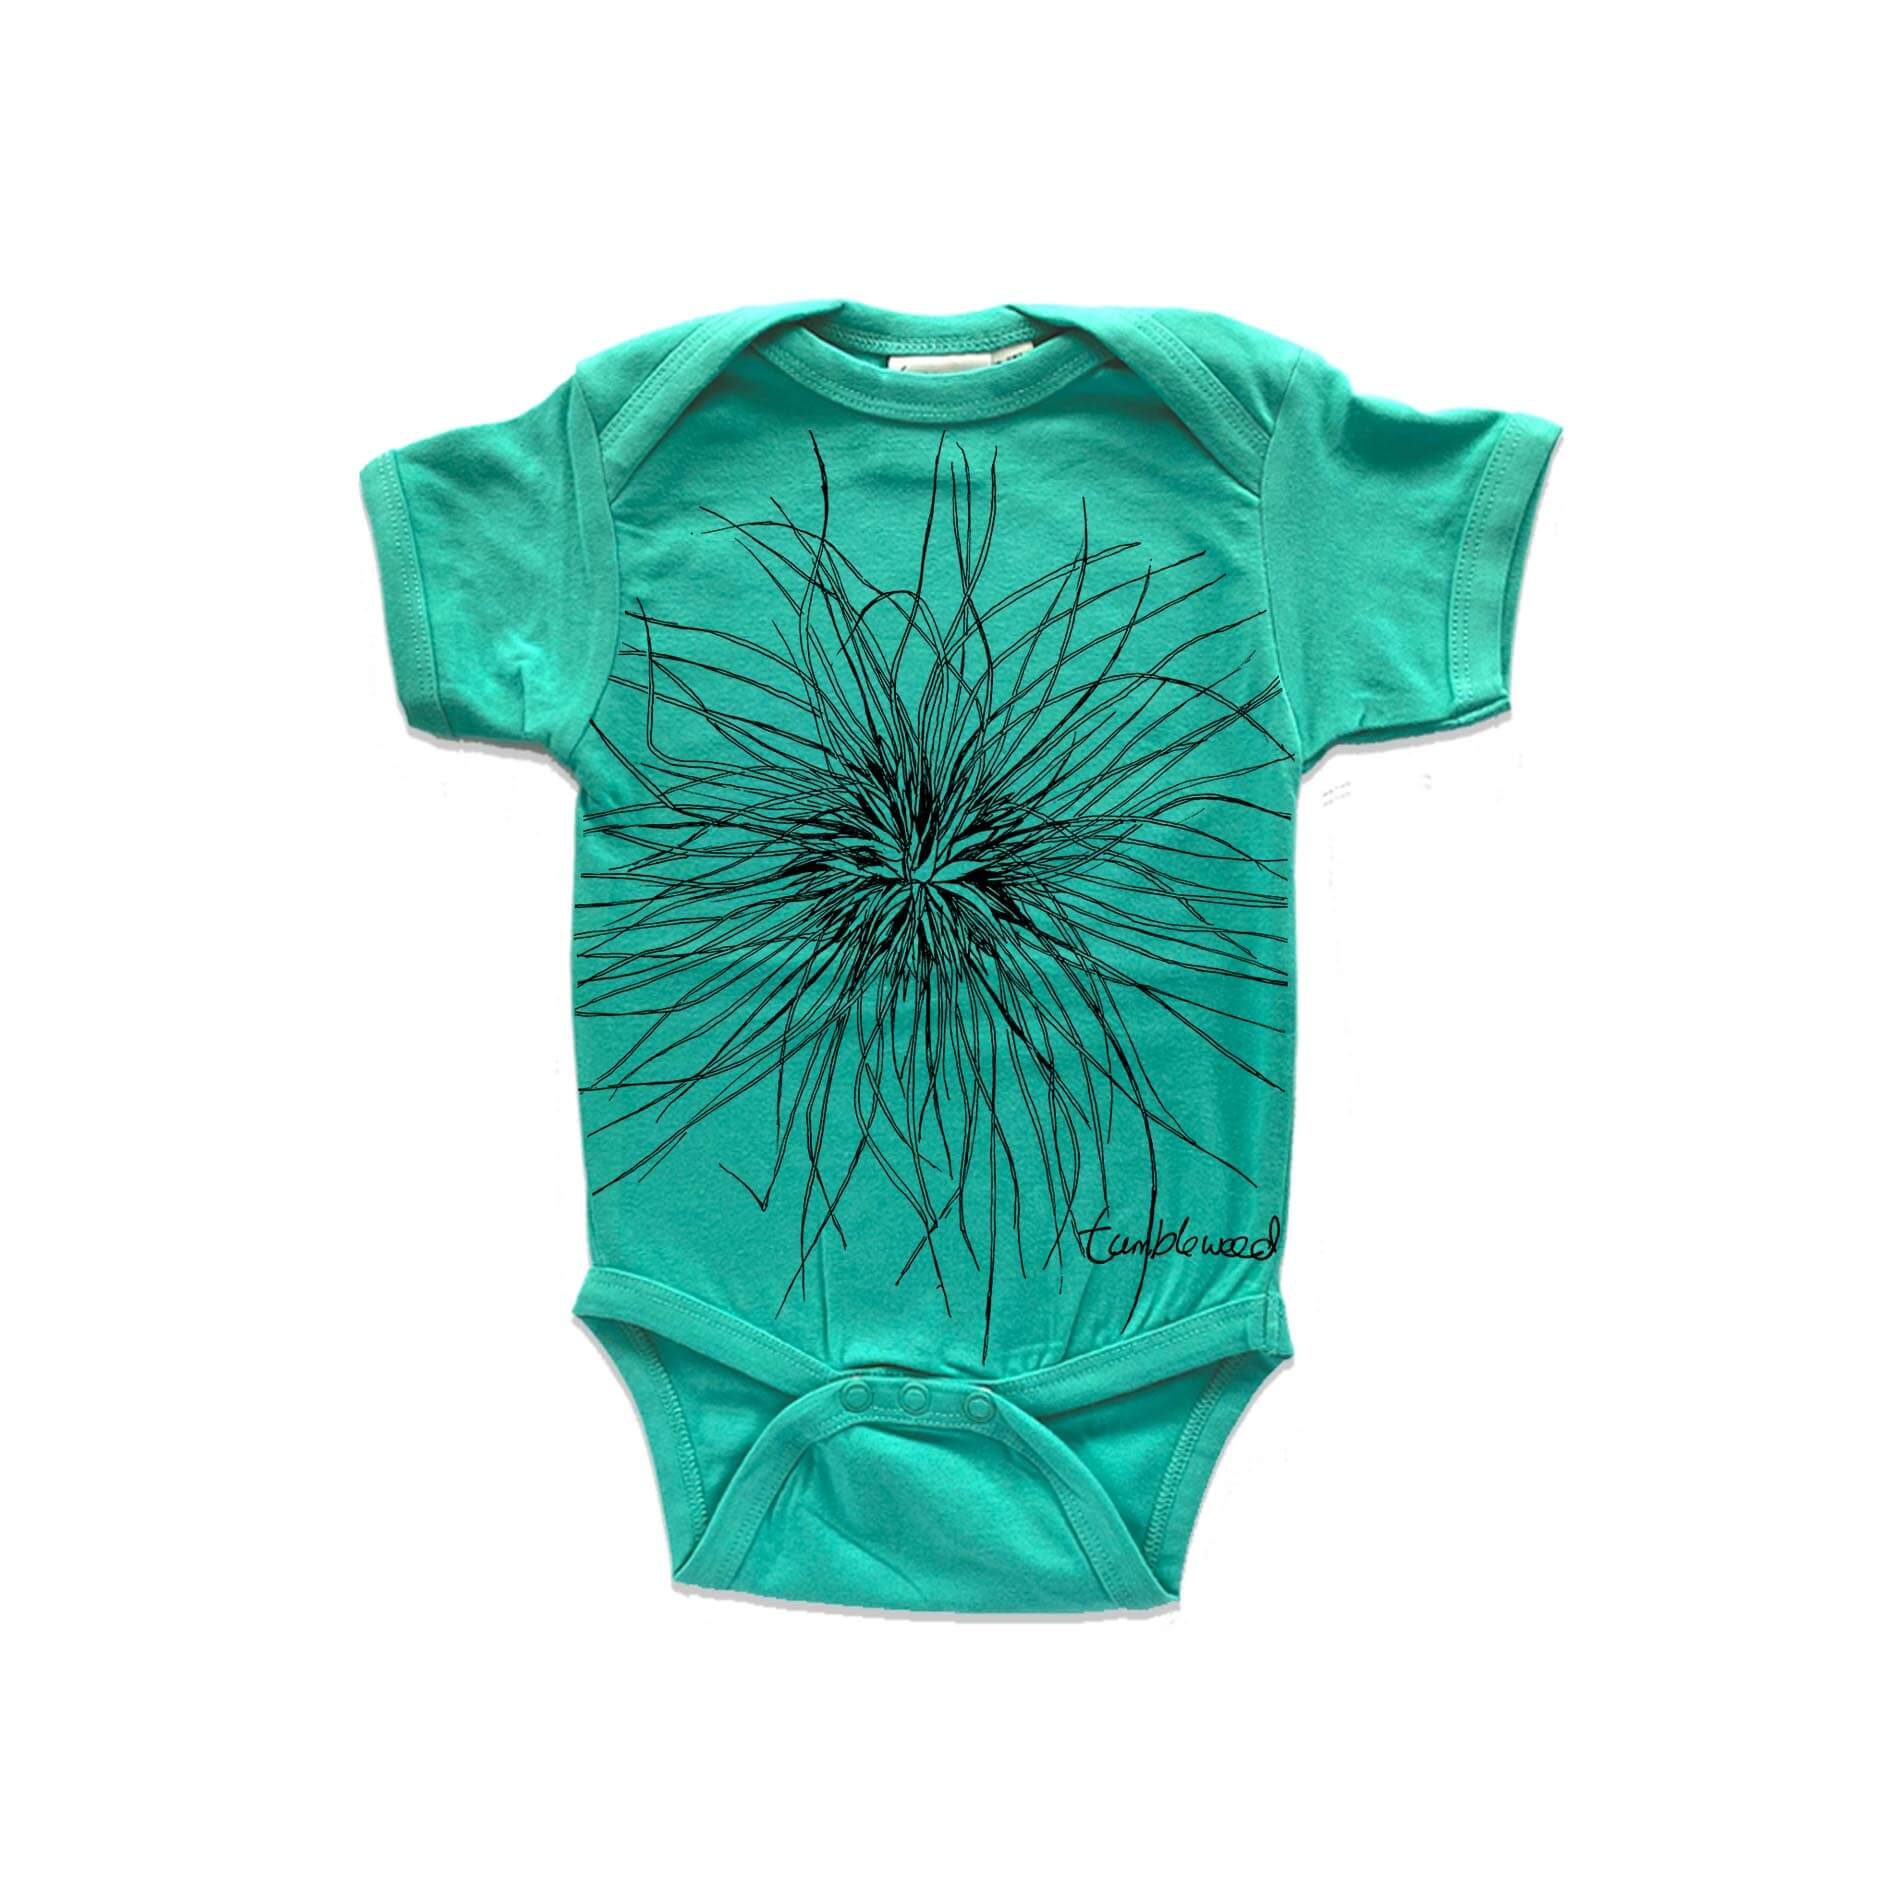 Short sleeved, marine, organic cotton, baby onesie featuring a screen printed Tumbleweed/Spinifex design.
 design.